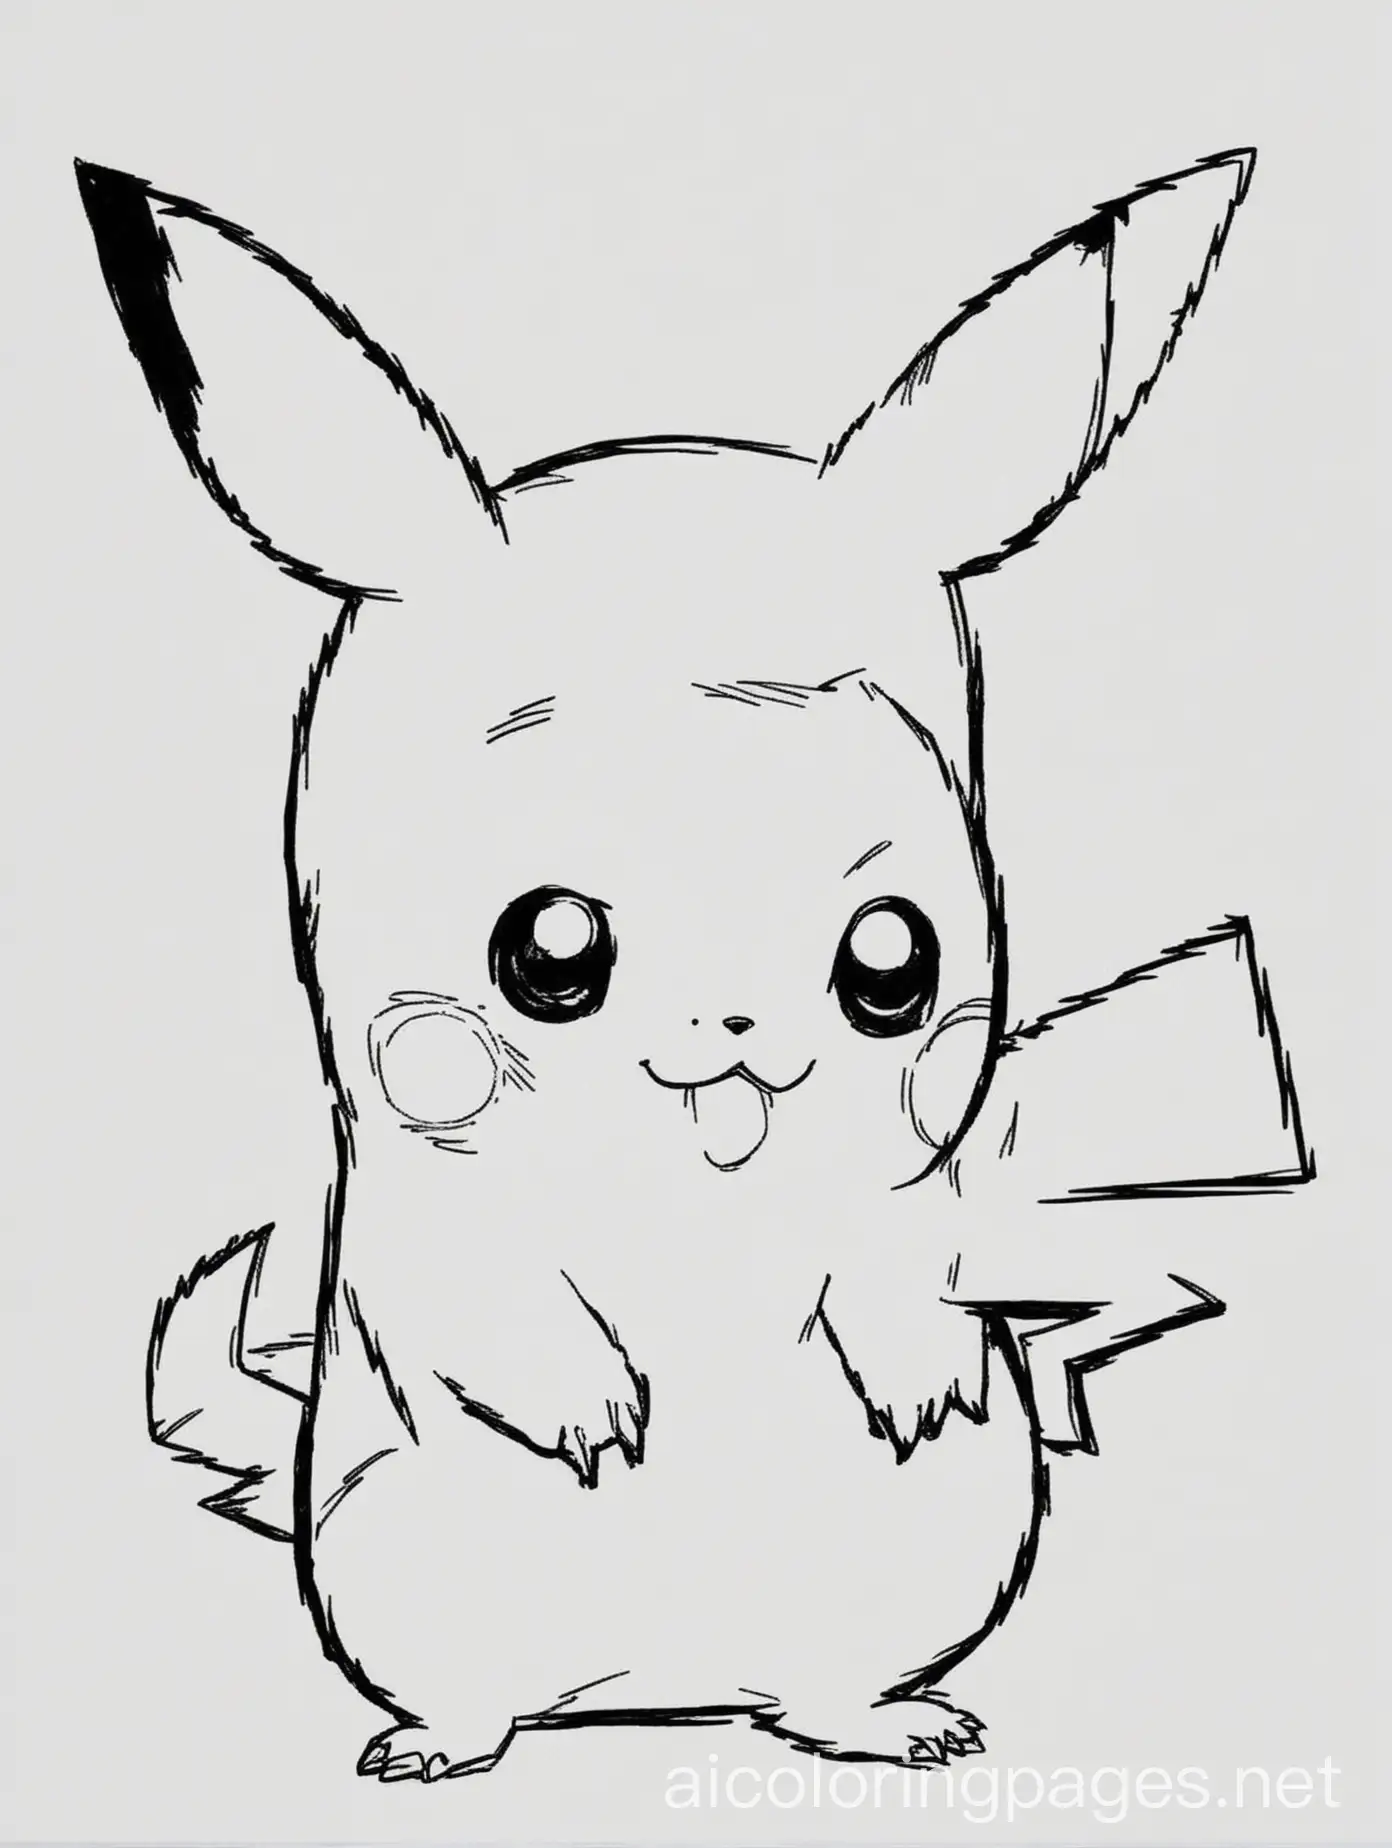 picachu pokemon, Coloring Page, black and white, line art, white background, Simplicity, Ample White Space. The background of the coloring page is plain white to make it easy for young children to color within the lines. The outlines of all the subjects are easy to distinguish, making it simple for kids to color without too much difficulty